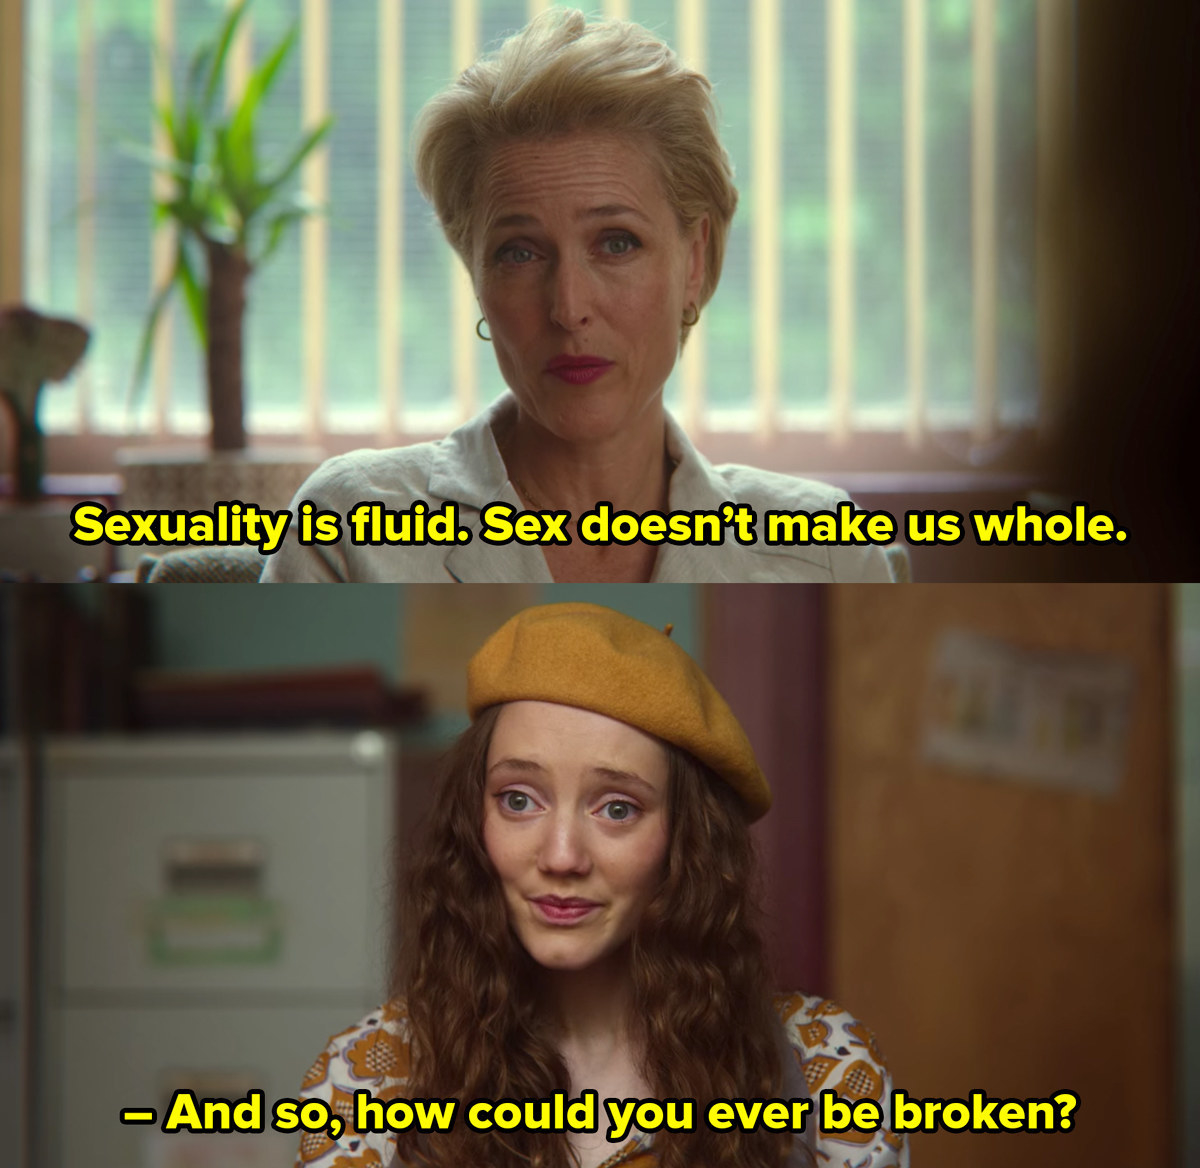 Jane to Florence: &quot;Sex doesn&#x27;t make us whole, so how could you ever be broken?&quot;